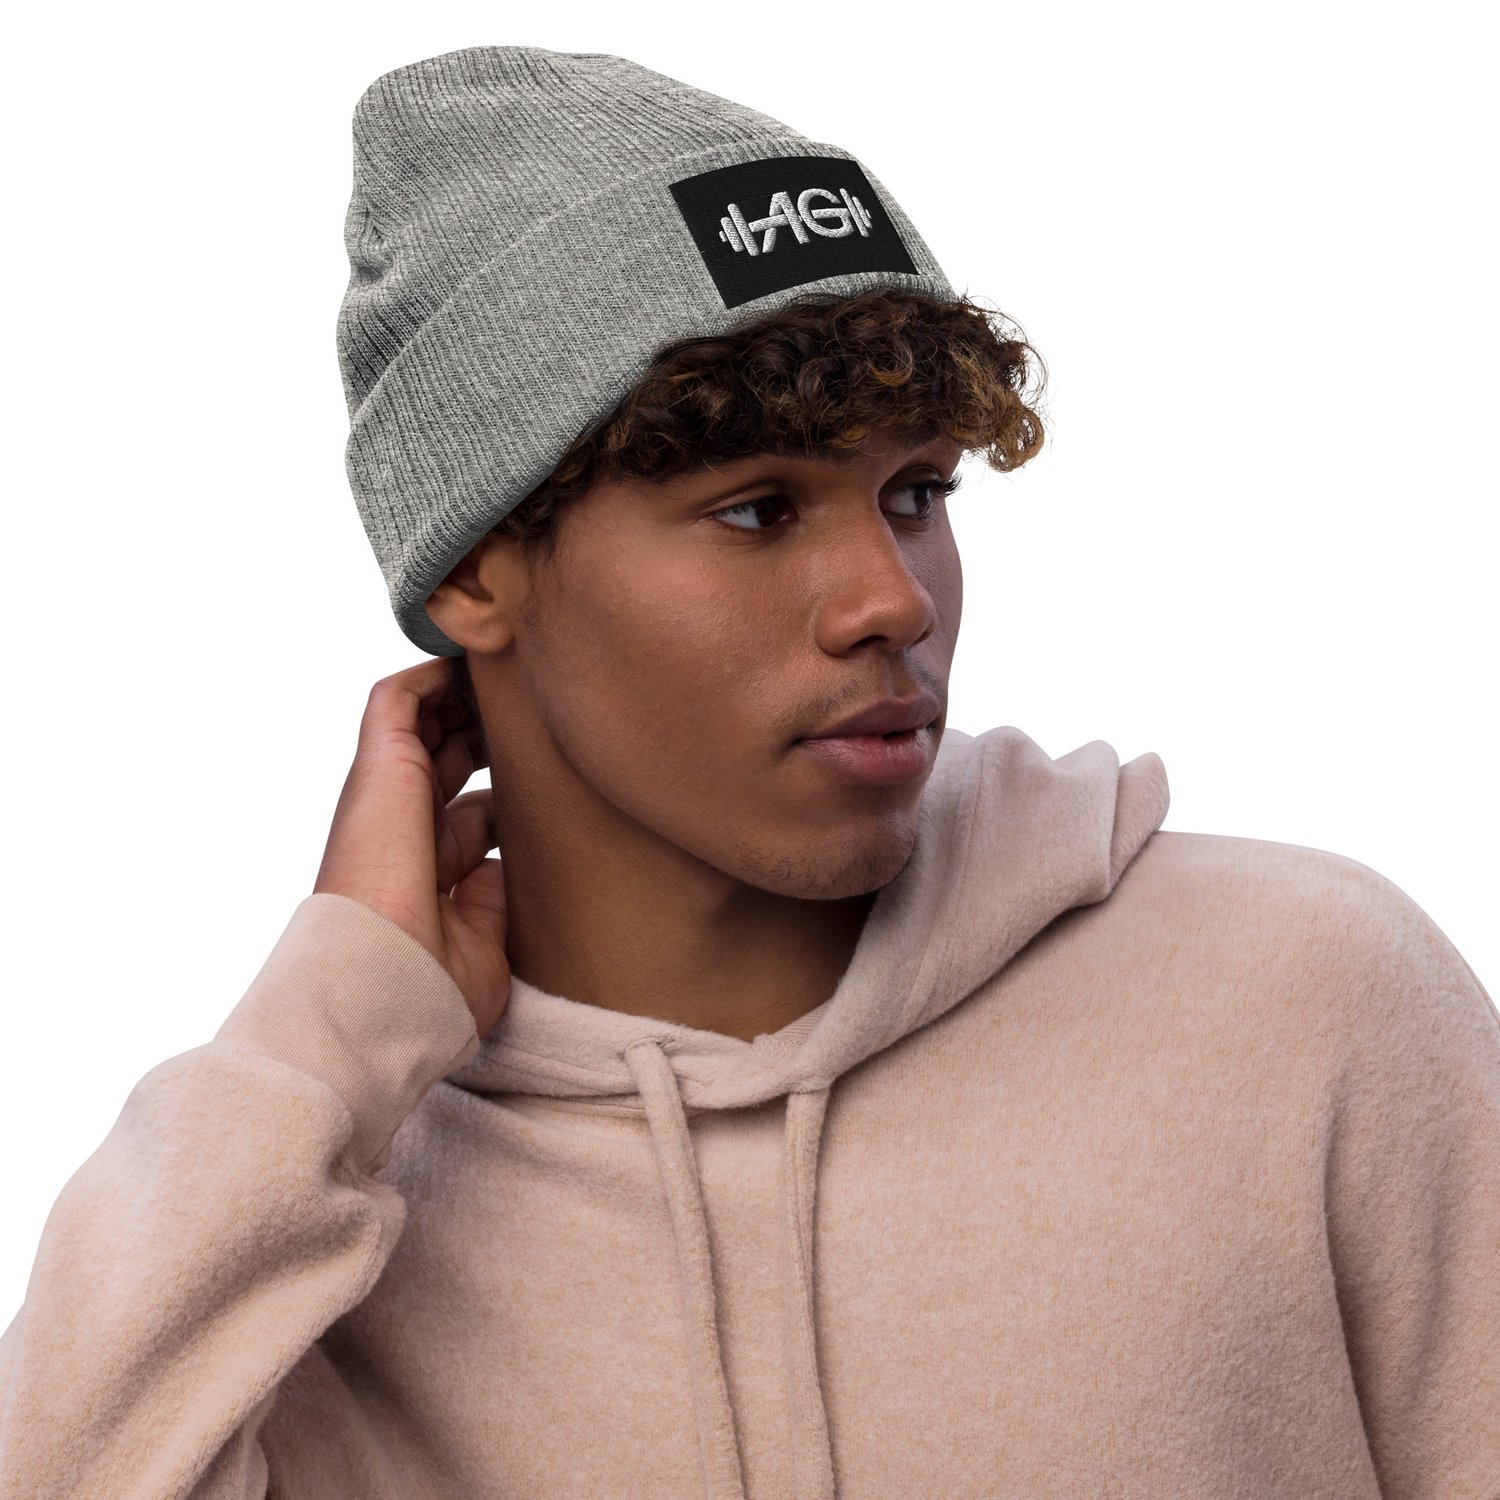 Ribbed Knit Aesthetic Beanie — The Aesthetic Gorilla